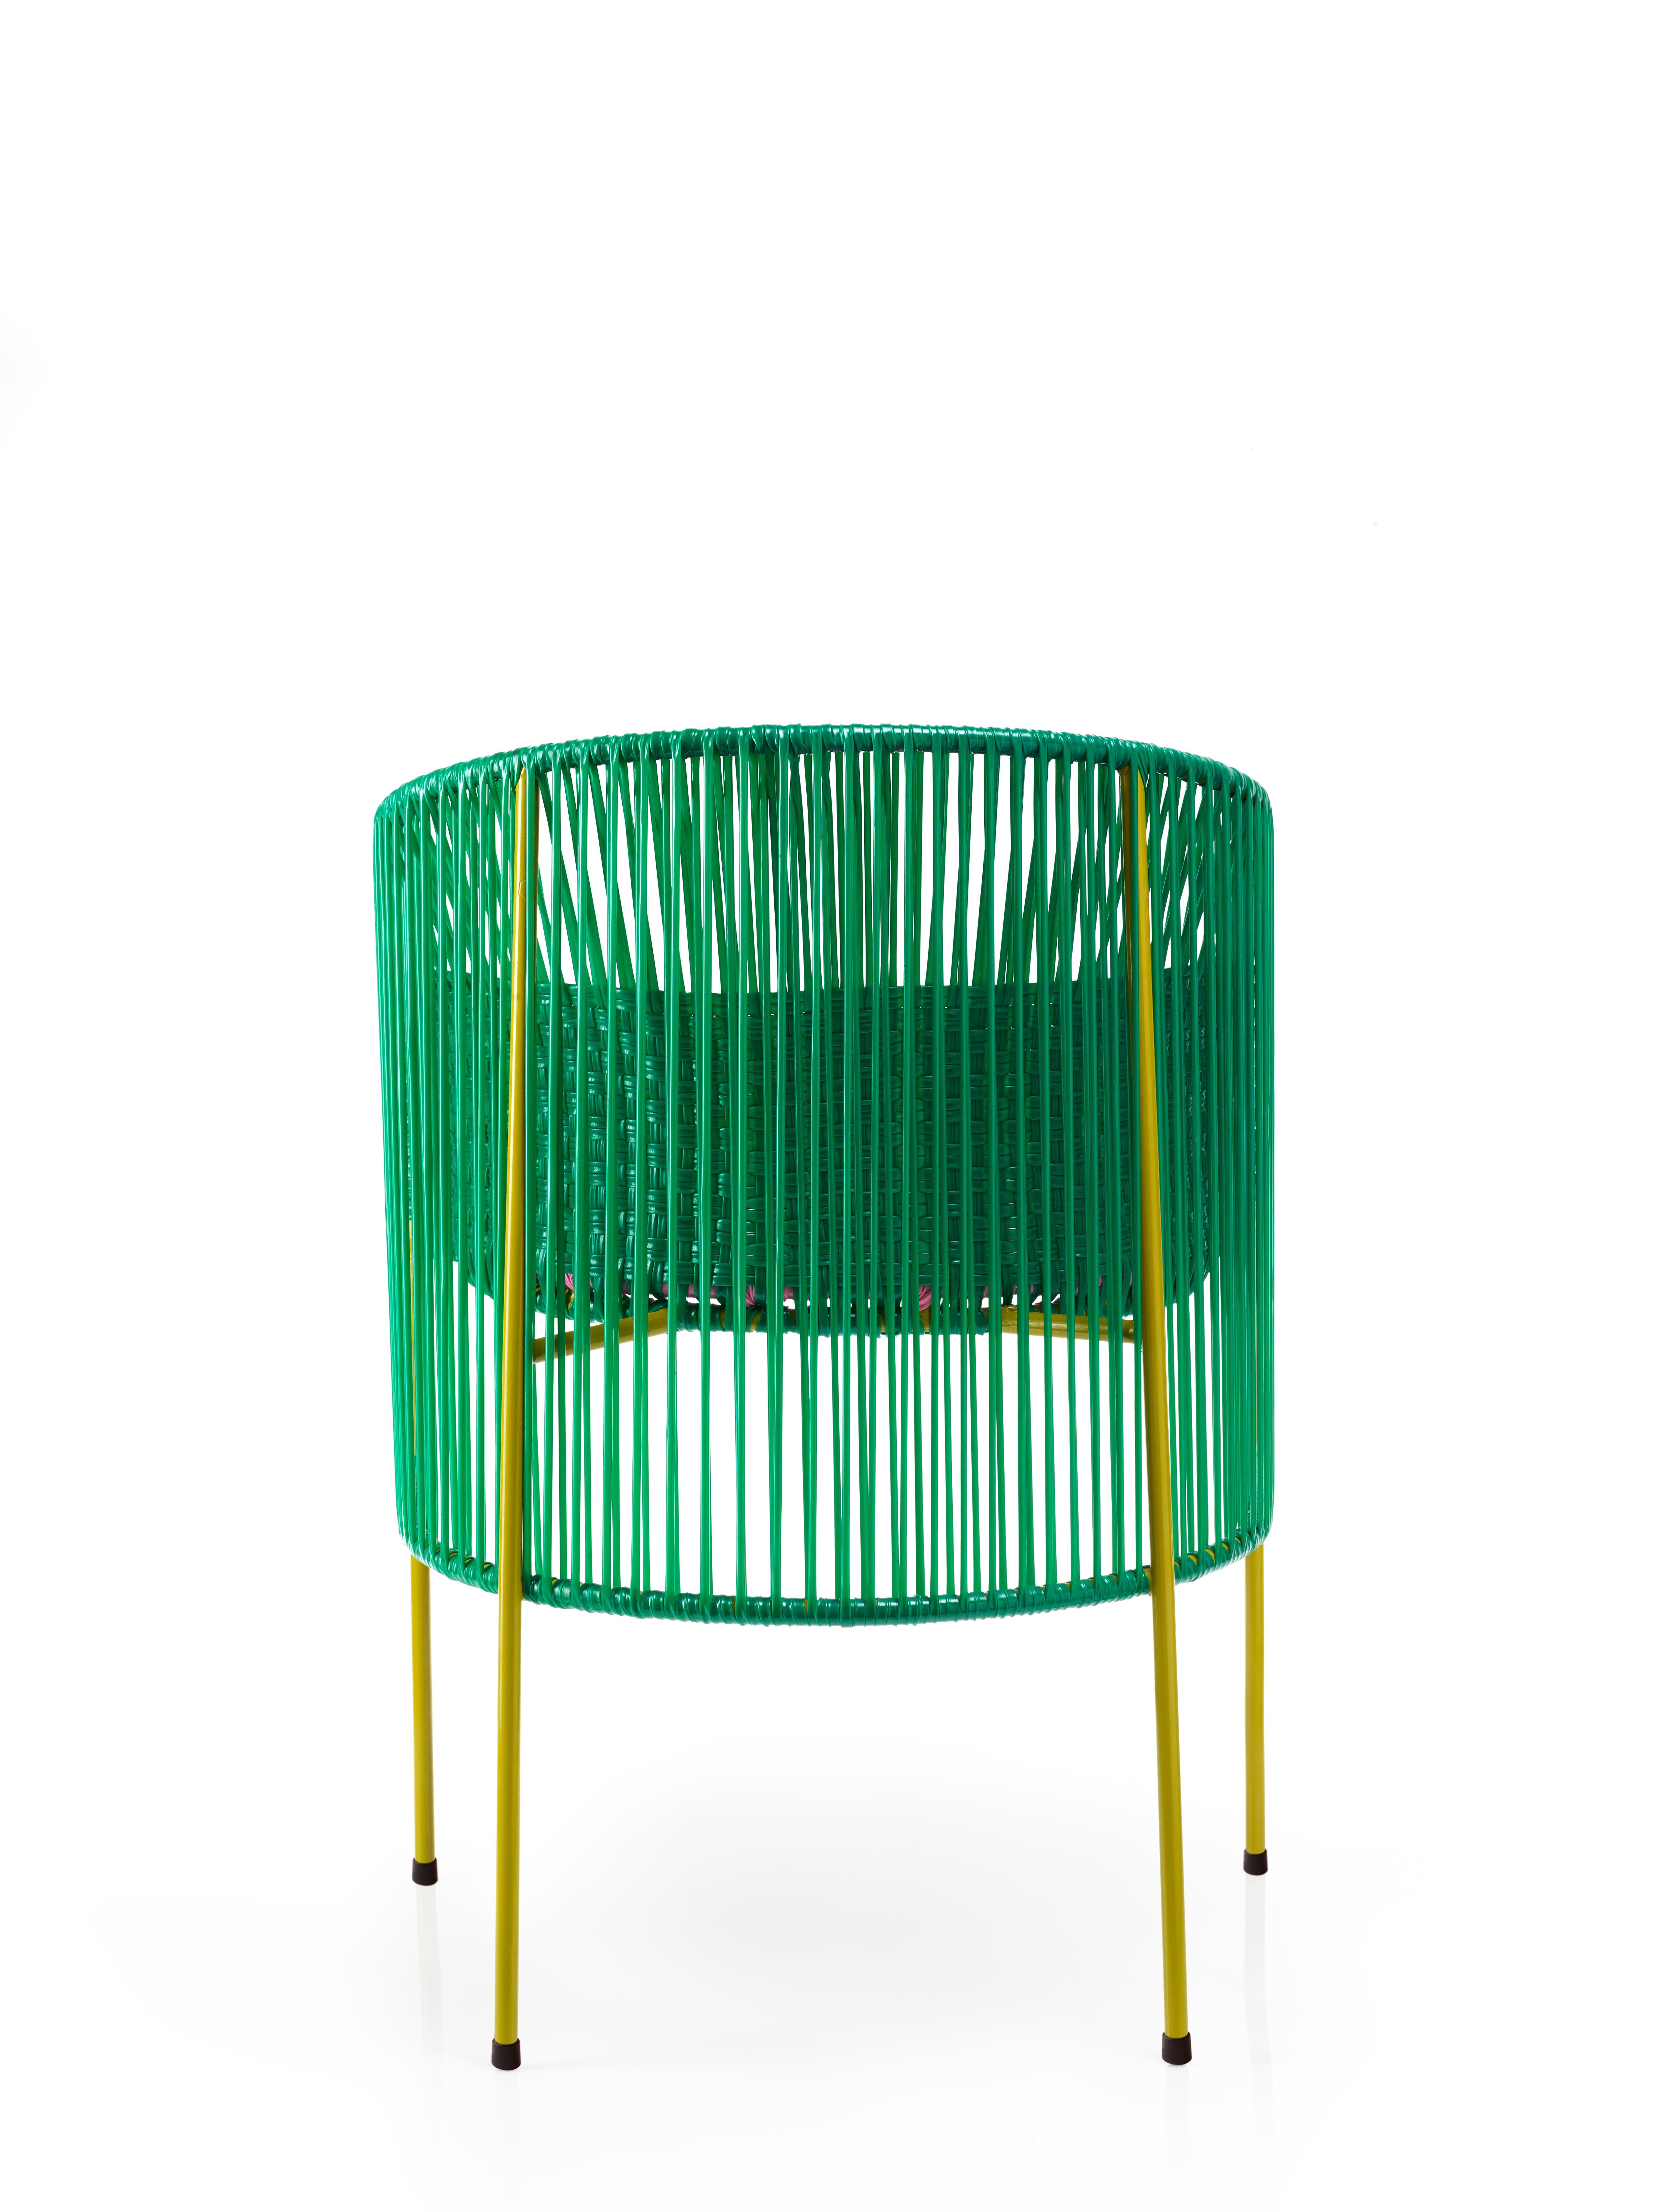 Contemporary Set of 4 Green Caribe Dining Chair by Sebastian Herkner For Sale